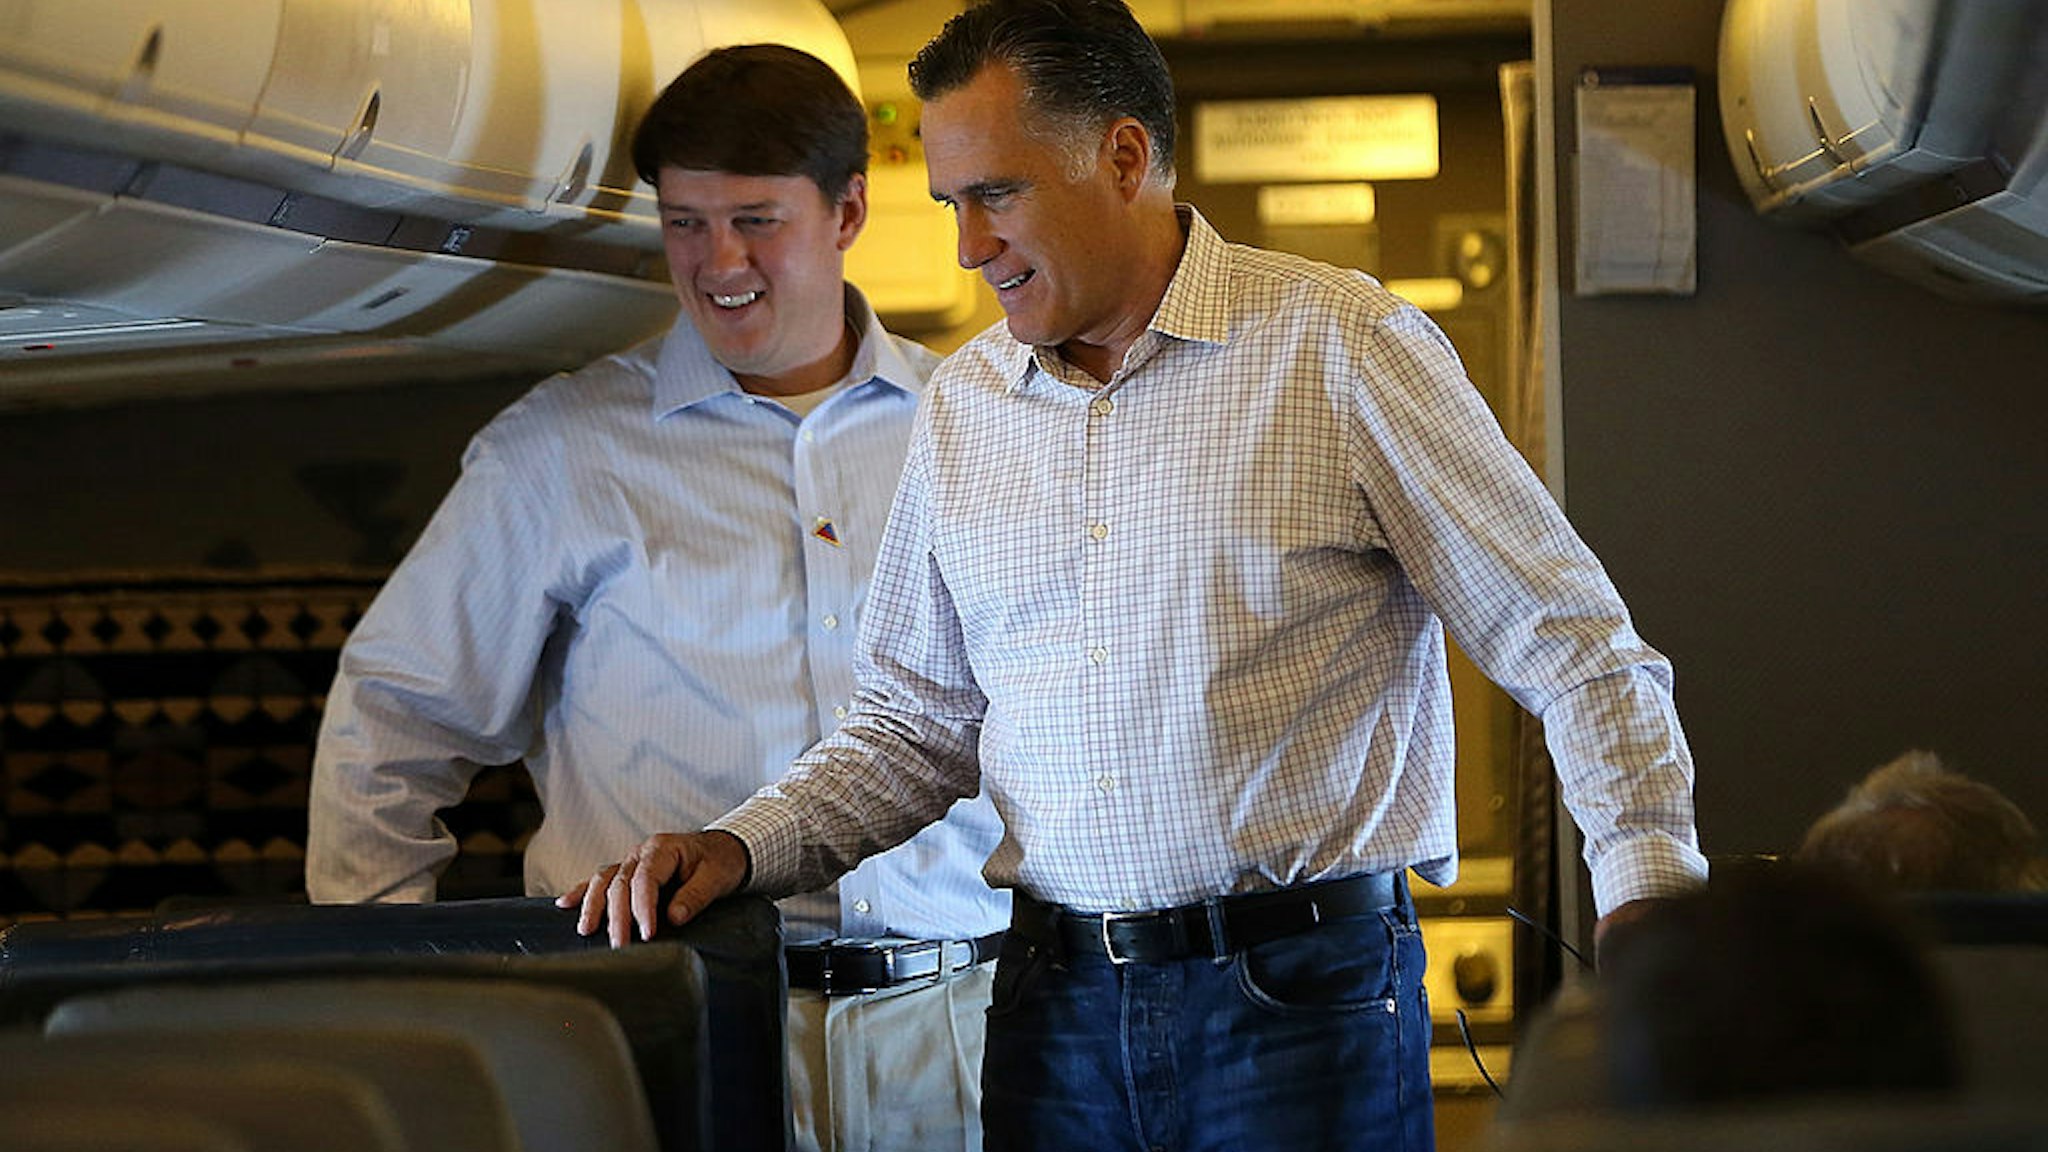 Republican presidential candidate, former Massachusetts Gov. Mitt Romney (R) stands with traveling press secretary Rick Gorka (L) aboard his campaign plane on August 29, 2012 en route to Indianapolis, Indiana.